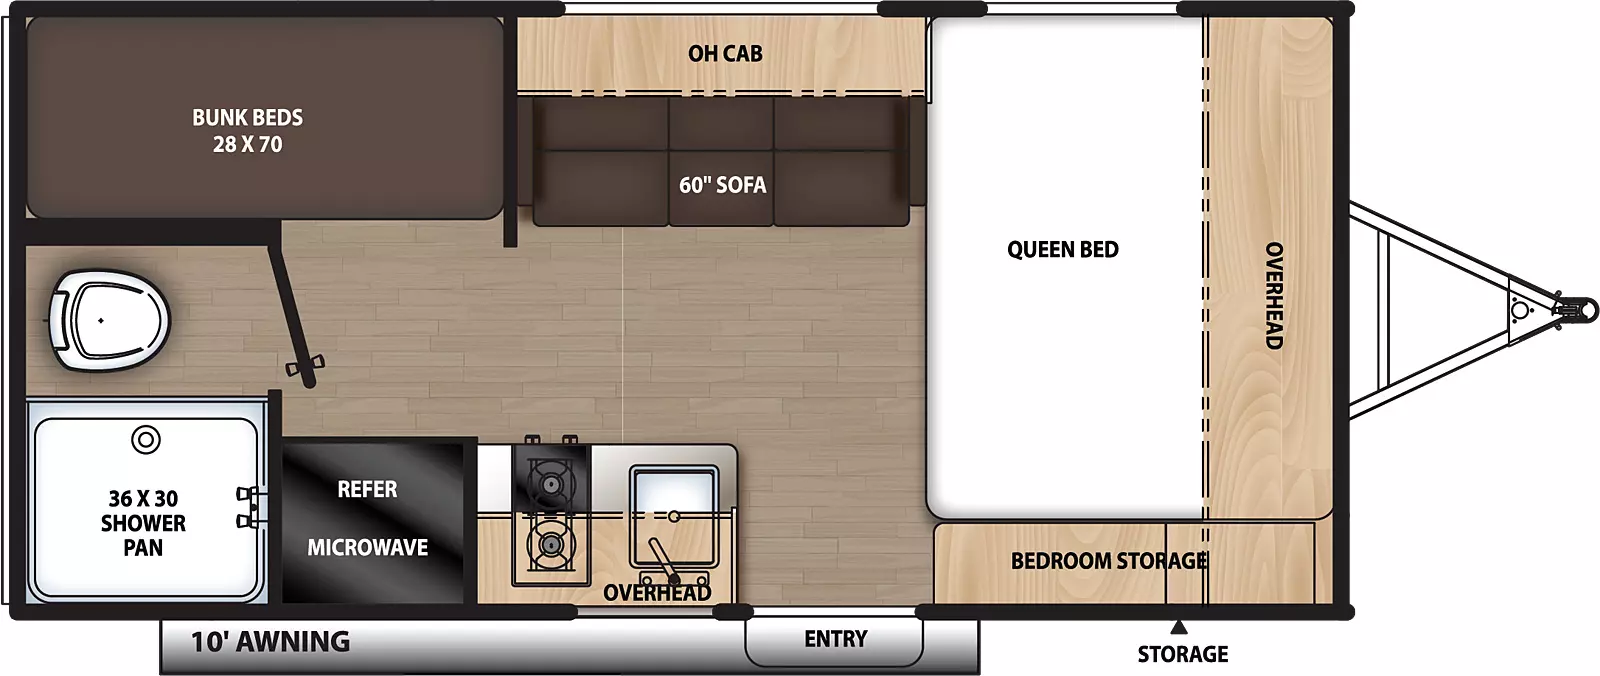 The 16BHX has no slide outs with one entry door on the door side, front storage, and 10 foot awning. Interior layout from front to back: side facing queen bed with cabinets overhead and door side bedroom storage, kitchen living dining area with 60 inch sofa and overhead cabinet on the off-door side, on the door side sink, stove and refrigerator with microwave and cabinets overhead. Bathroom located on the rear door side with shower and toilet only, bunk beds located on the rear off-door side. 